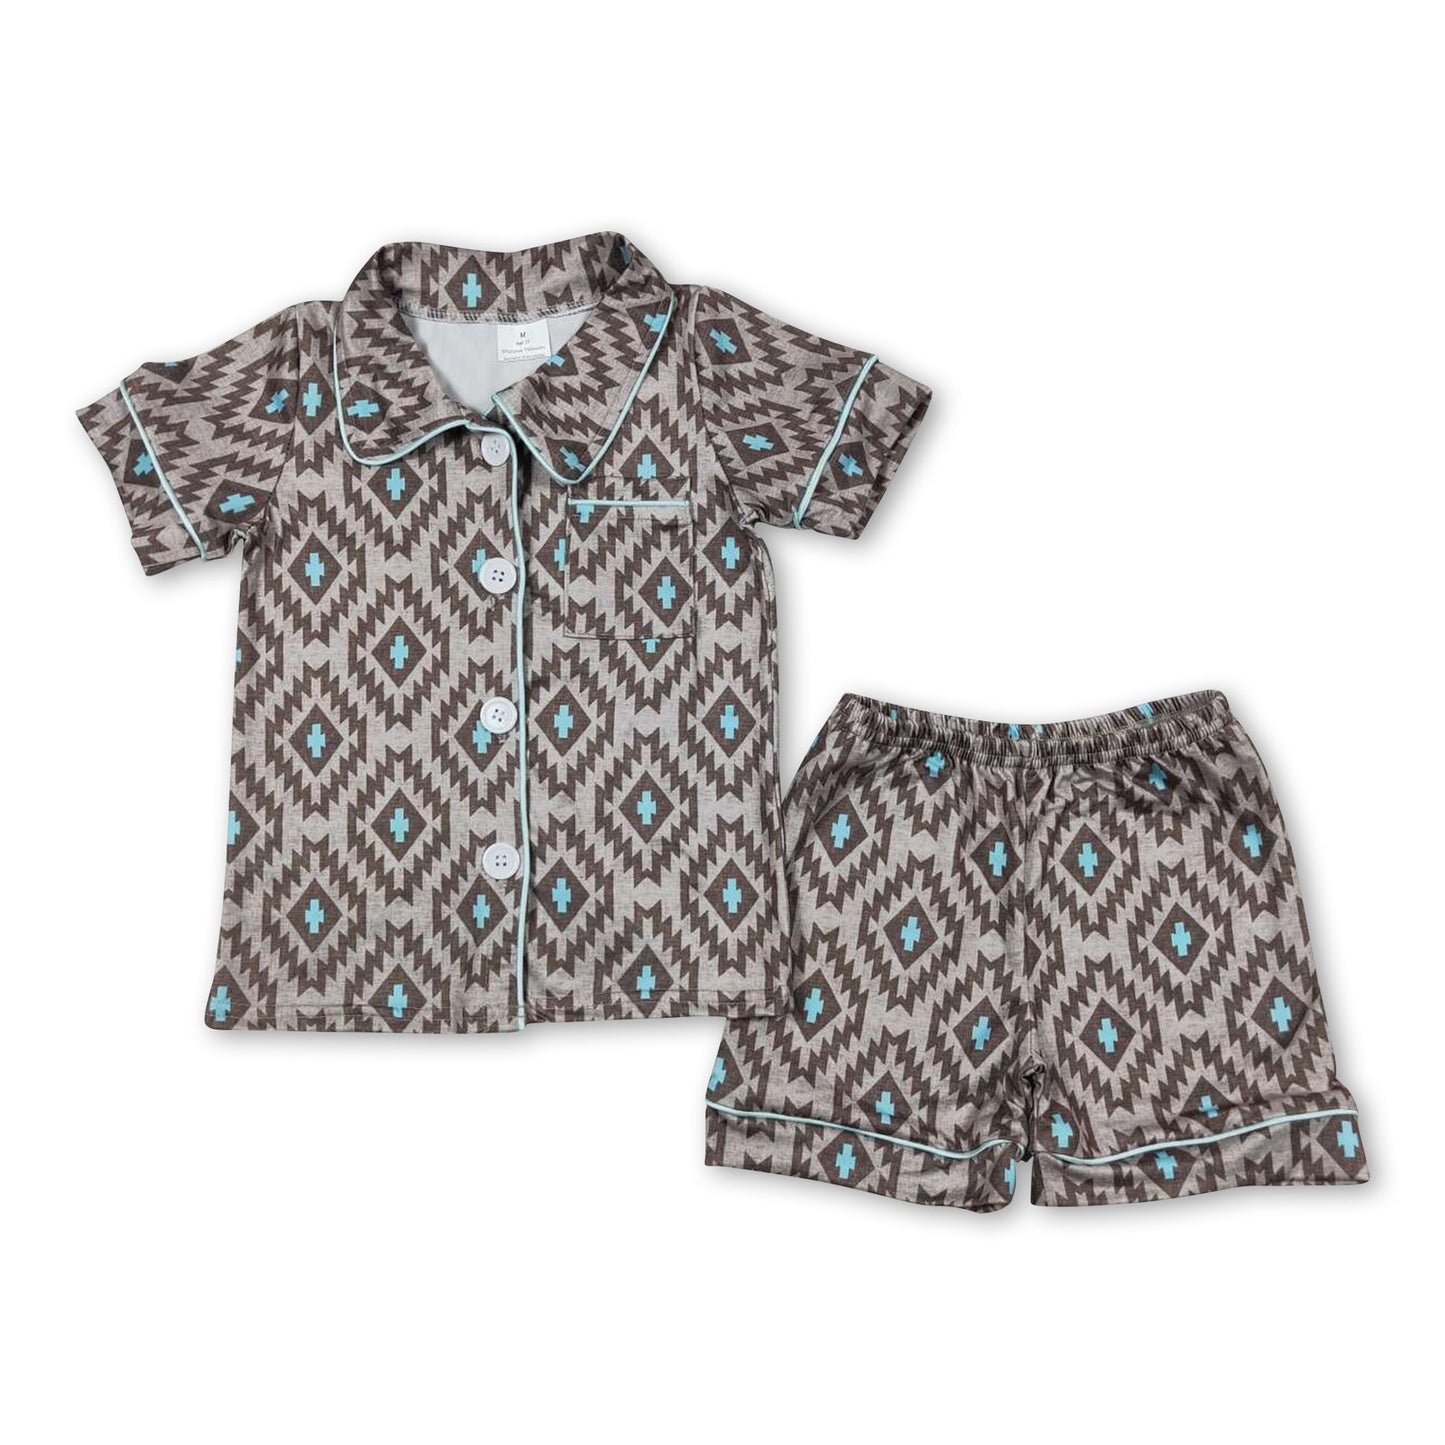 Turquoise aztec baby kids button down summer pajamas